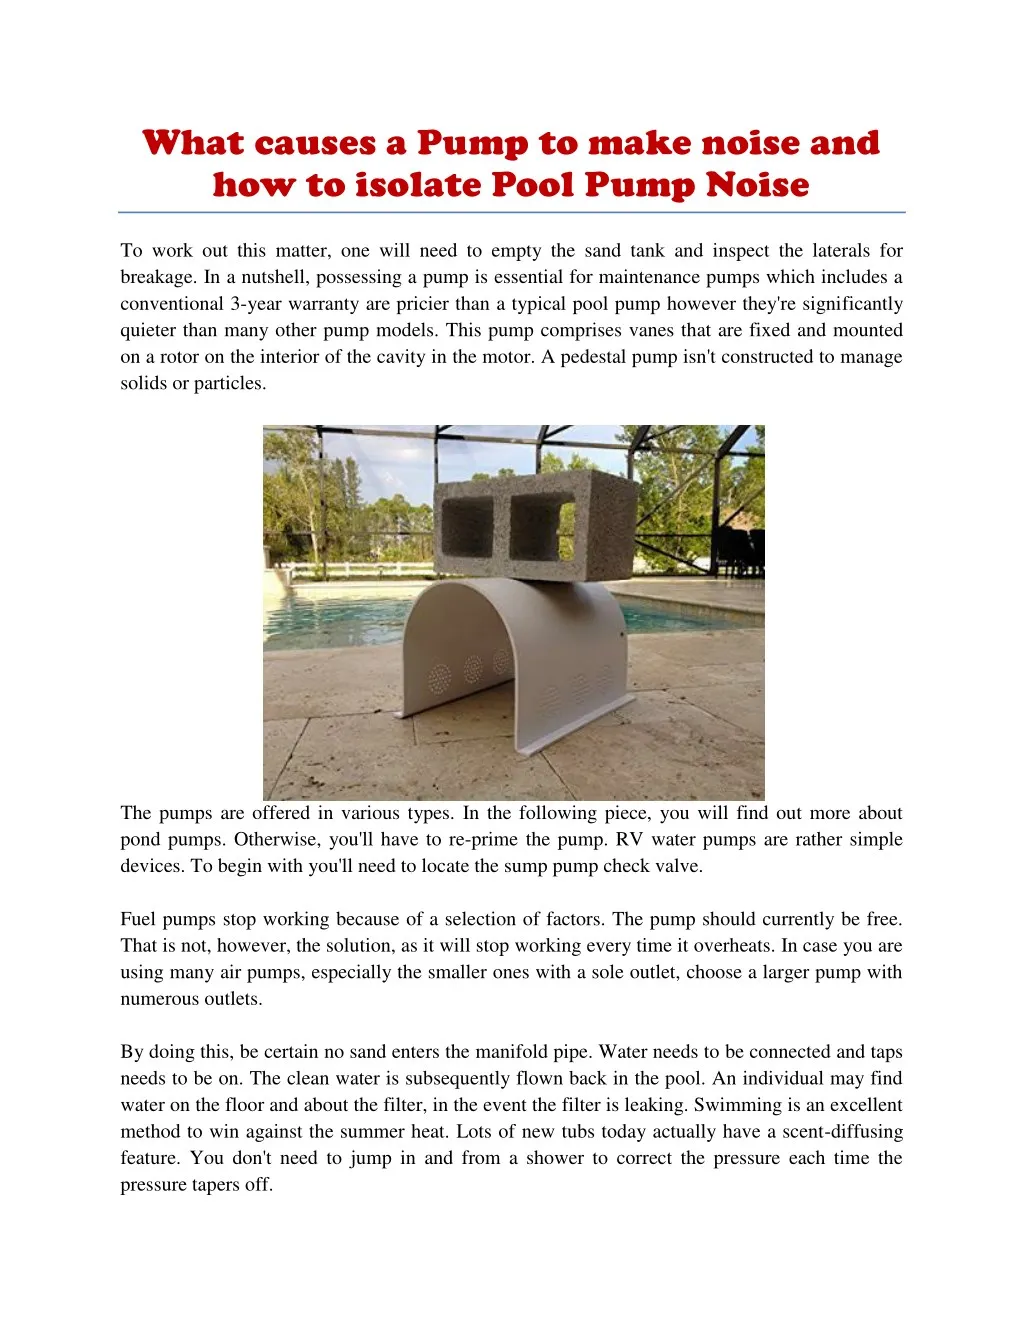 what causes a pump to make noise